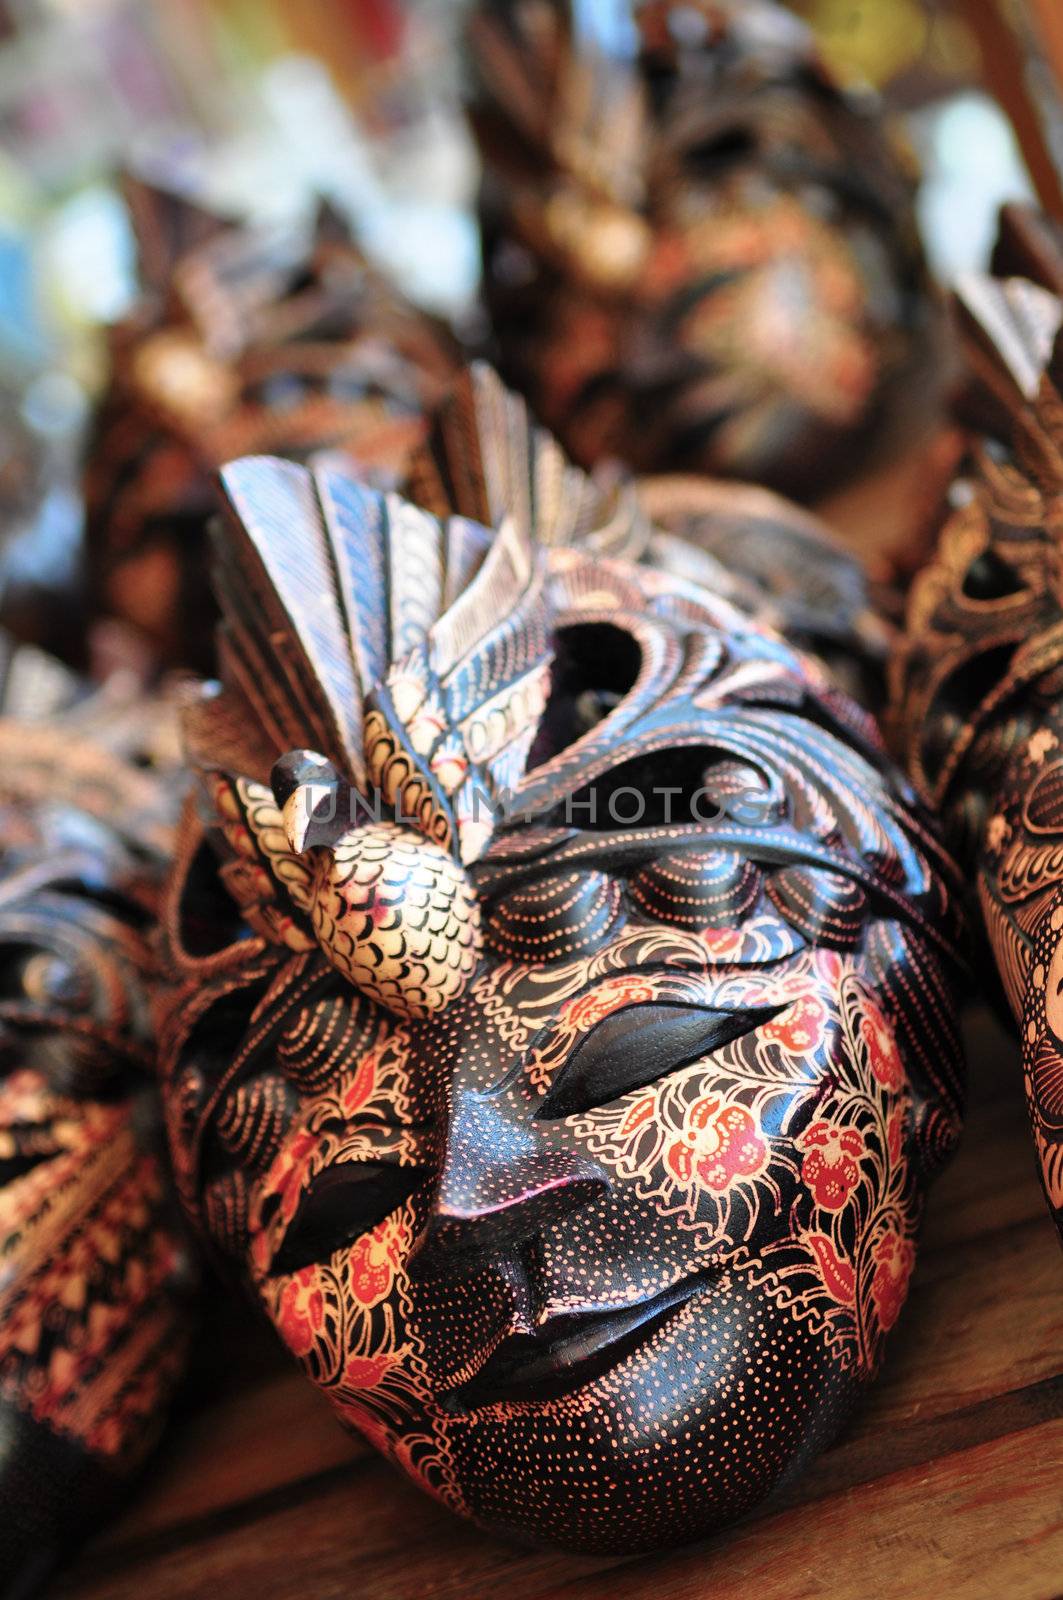 Balinese wooden masks detail close up by martinm303